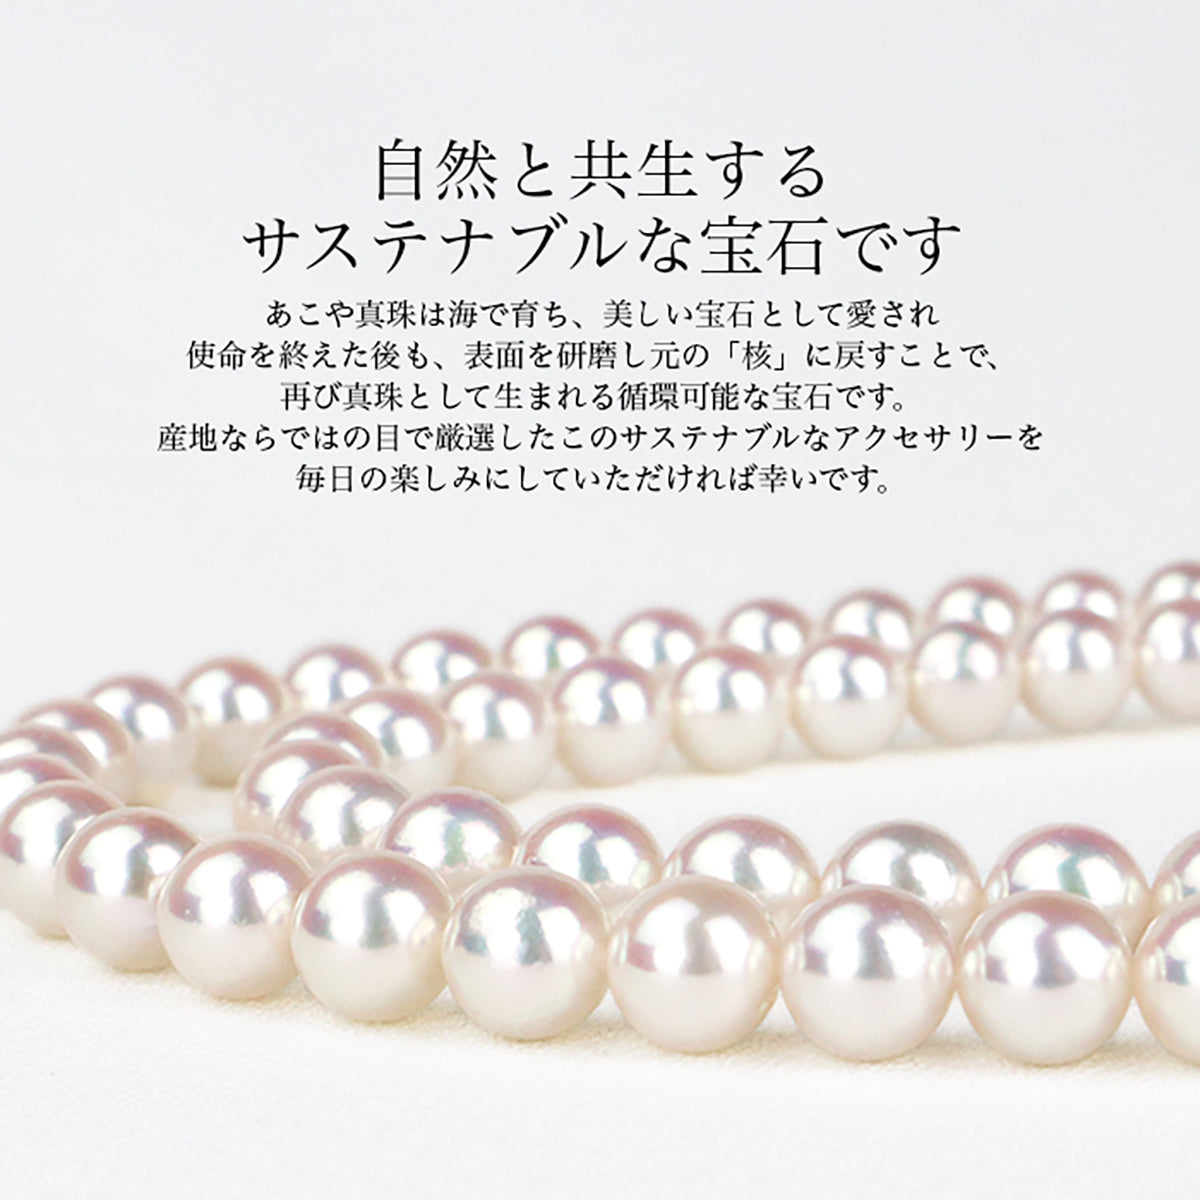 [Hanadama Certified Pearls] Formal Necklace Set of 2 [8.0-8.5mm] (Earrings included) Akoya Pearls with storage case [New Japan Pearl Research Institute Certificate of Authenticity]